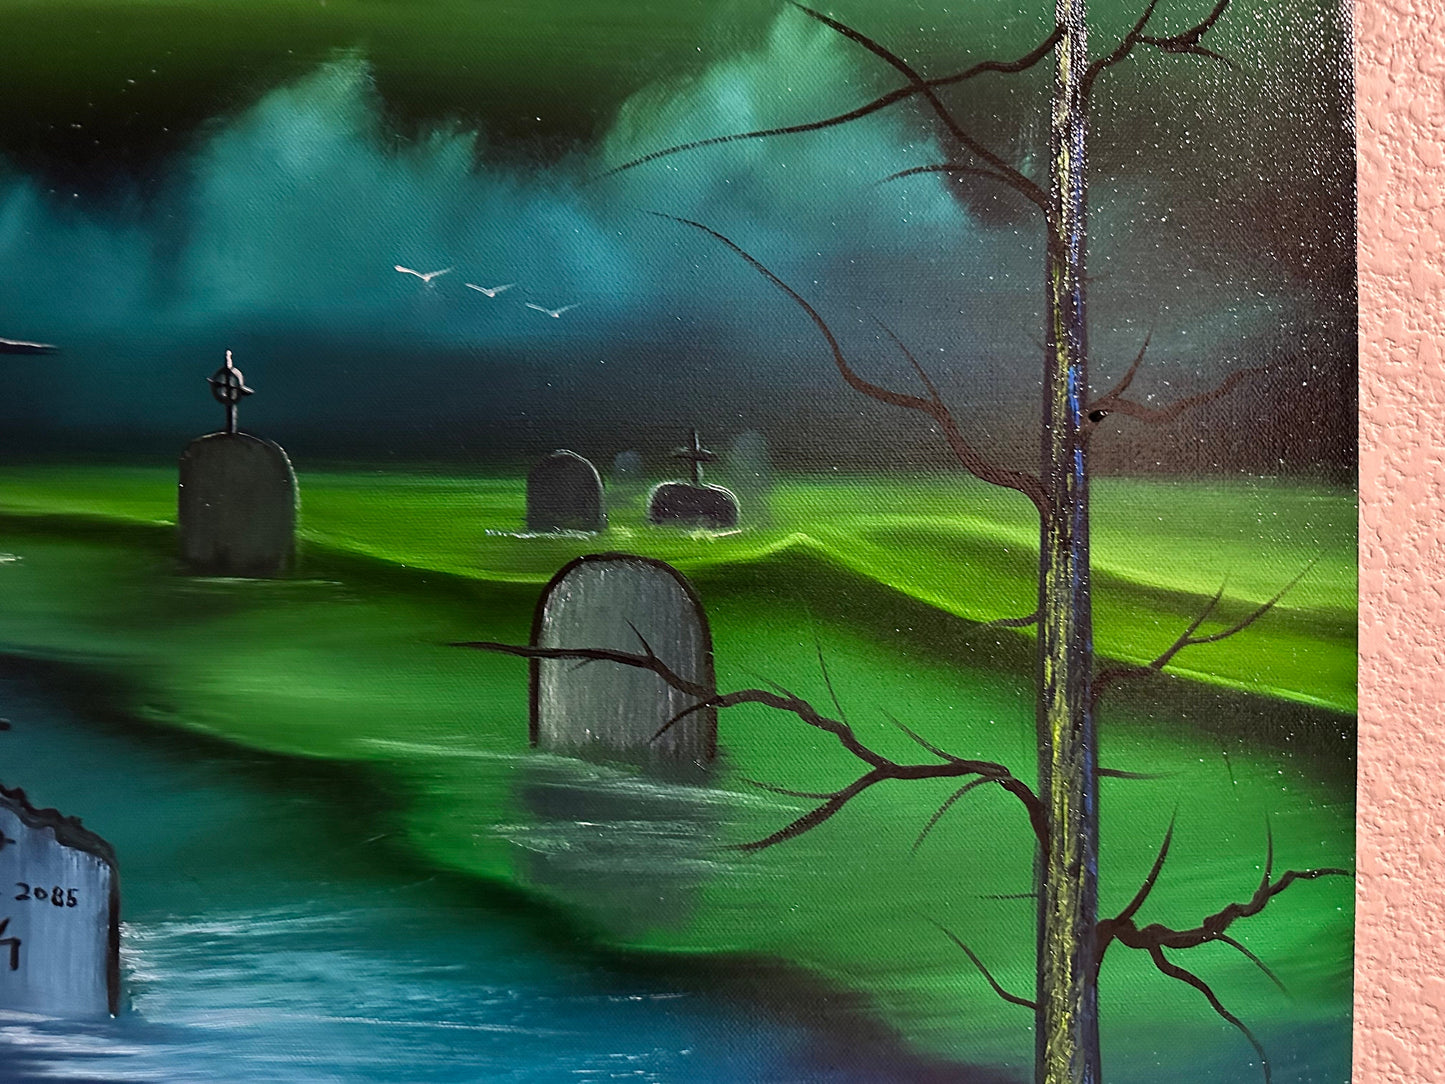 Painting 955 - 24x24" Pro Series Canvas Green Halloween Graveyard Seascape with Tombstones painted Live on TikTok - 9/22/23 by PaintWithJosh